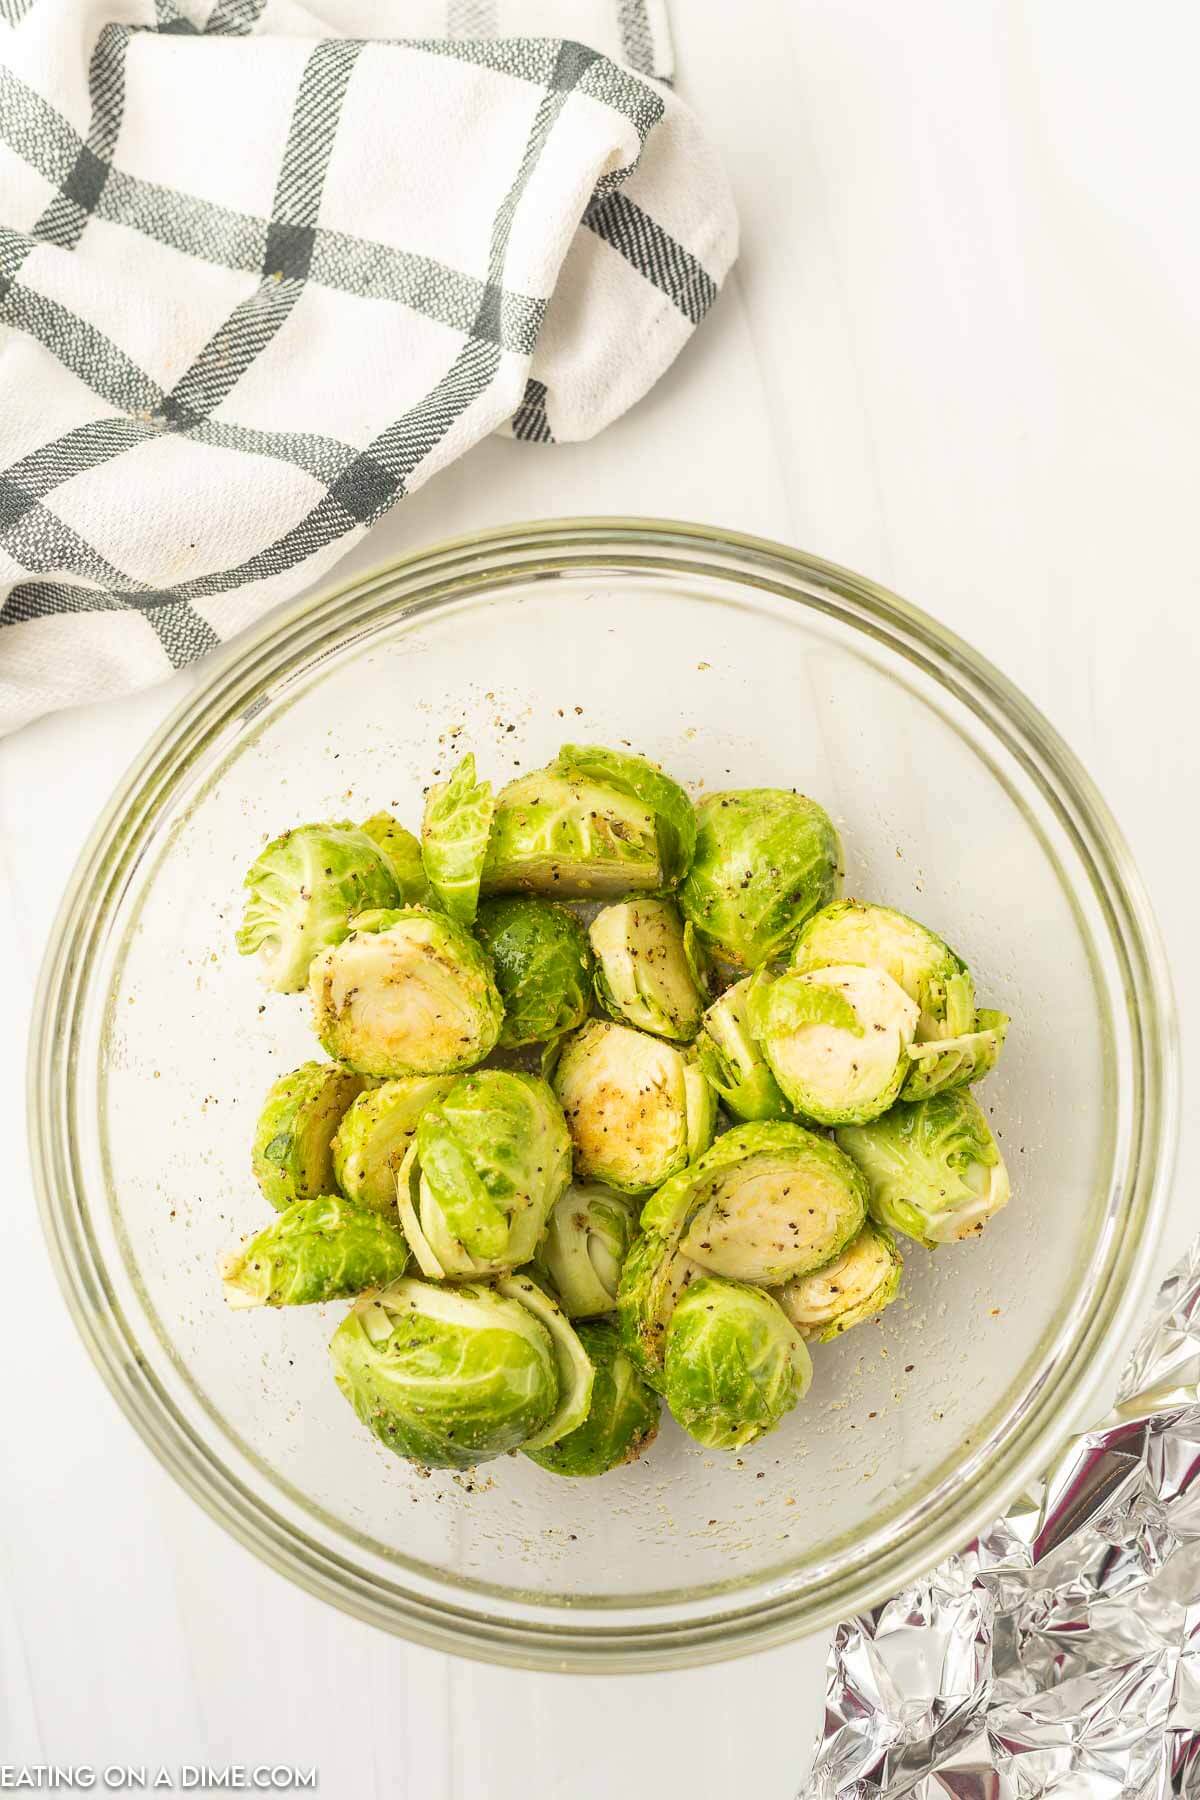 Place brussel sprouts in a bowl with seasoning. 